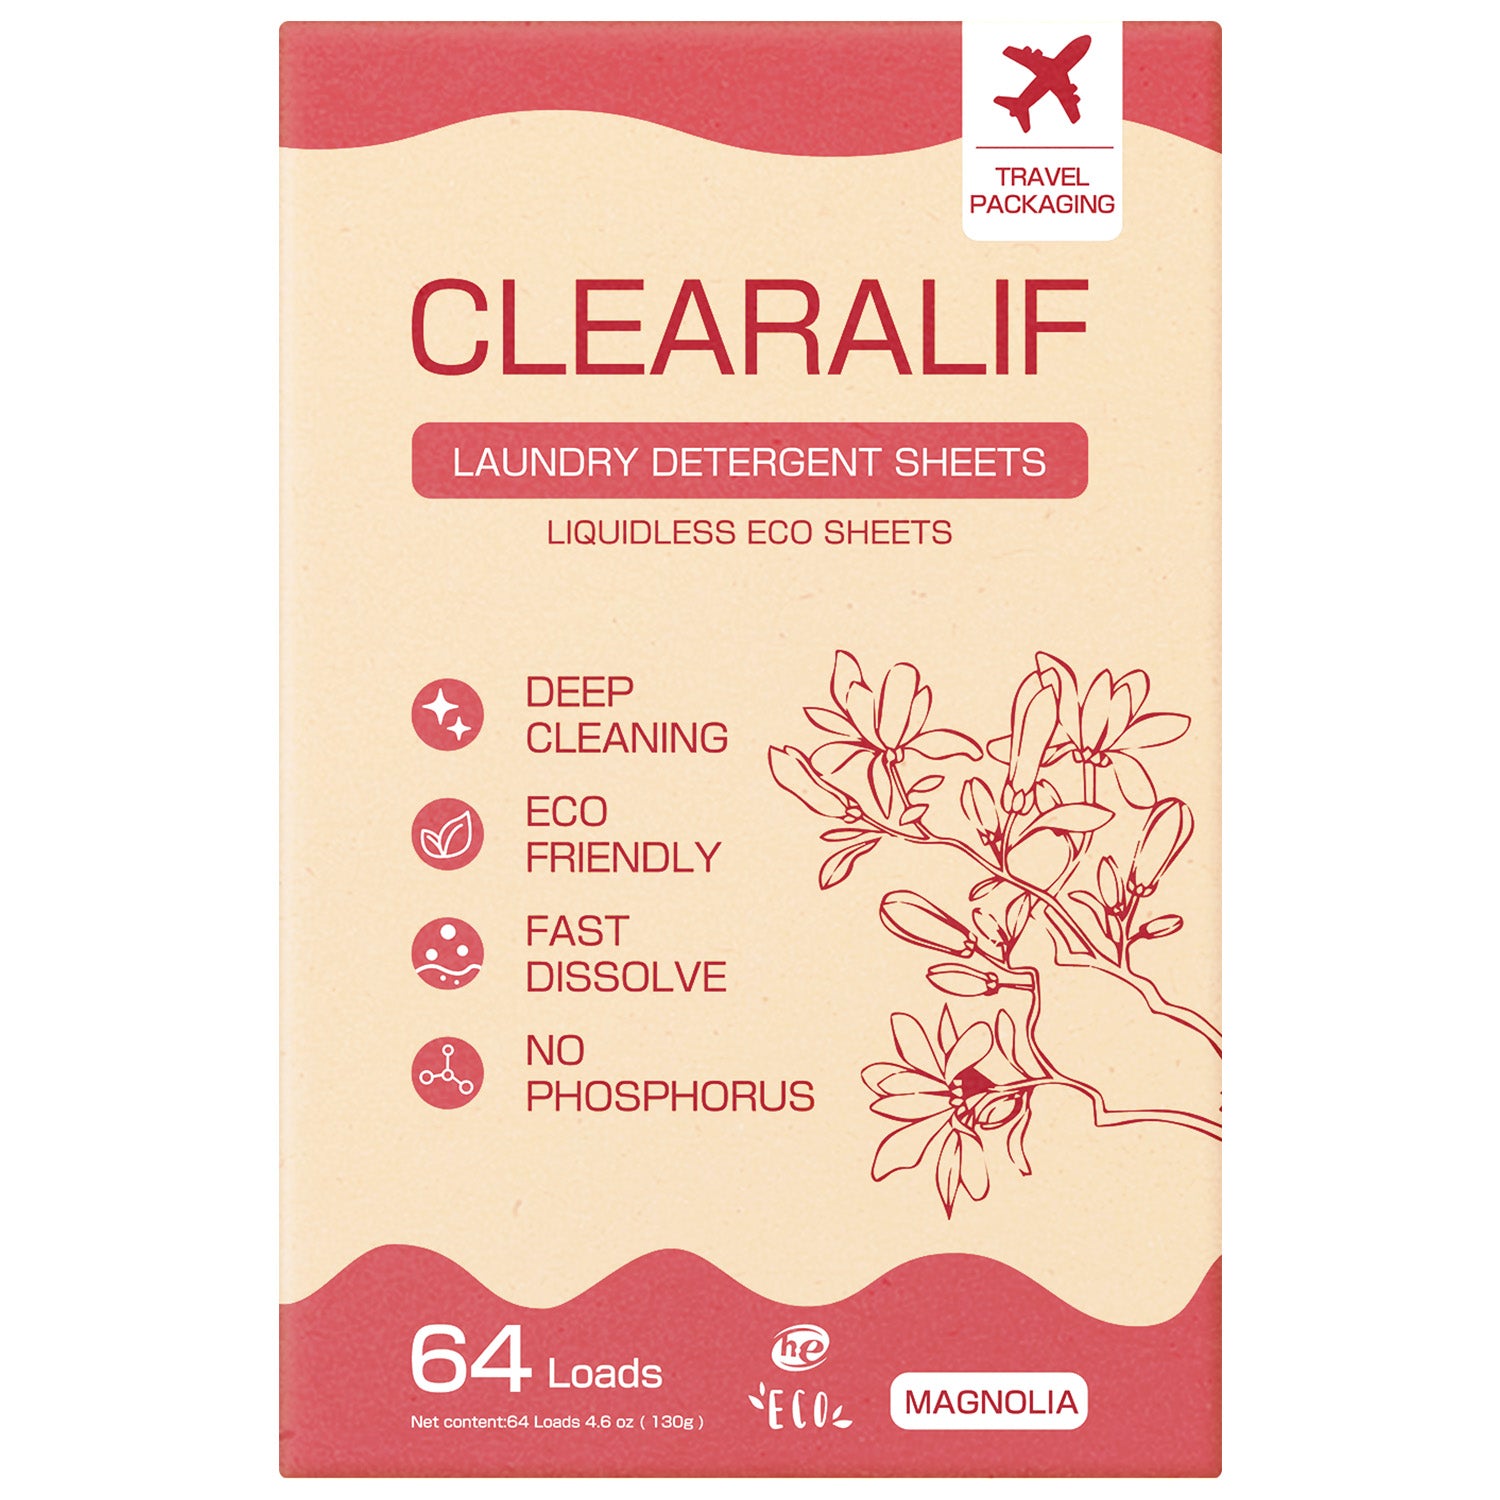 CLEARALIF Eco Friendly & Hypoallergenic Laundry Detergent 64 Loads, Magnolia